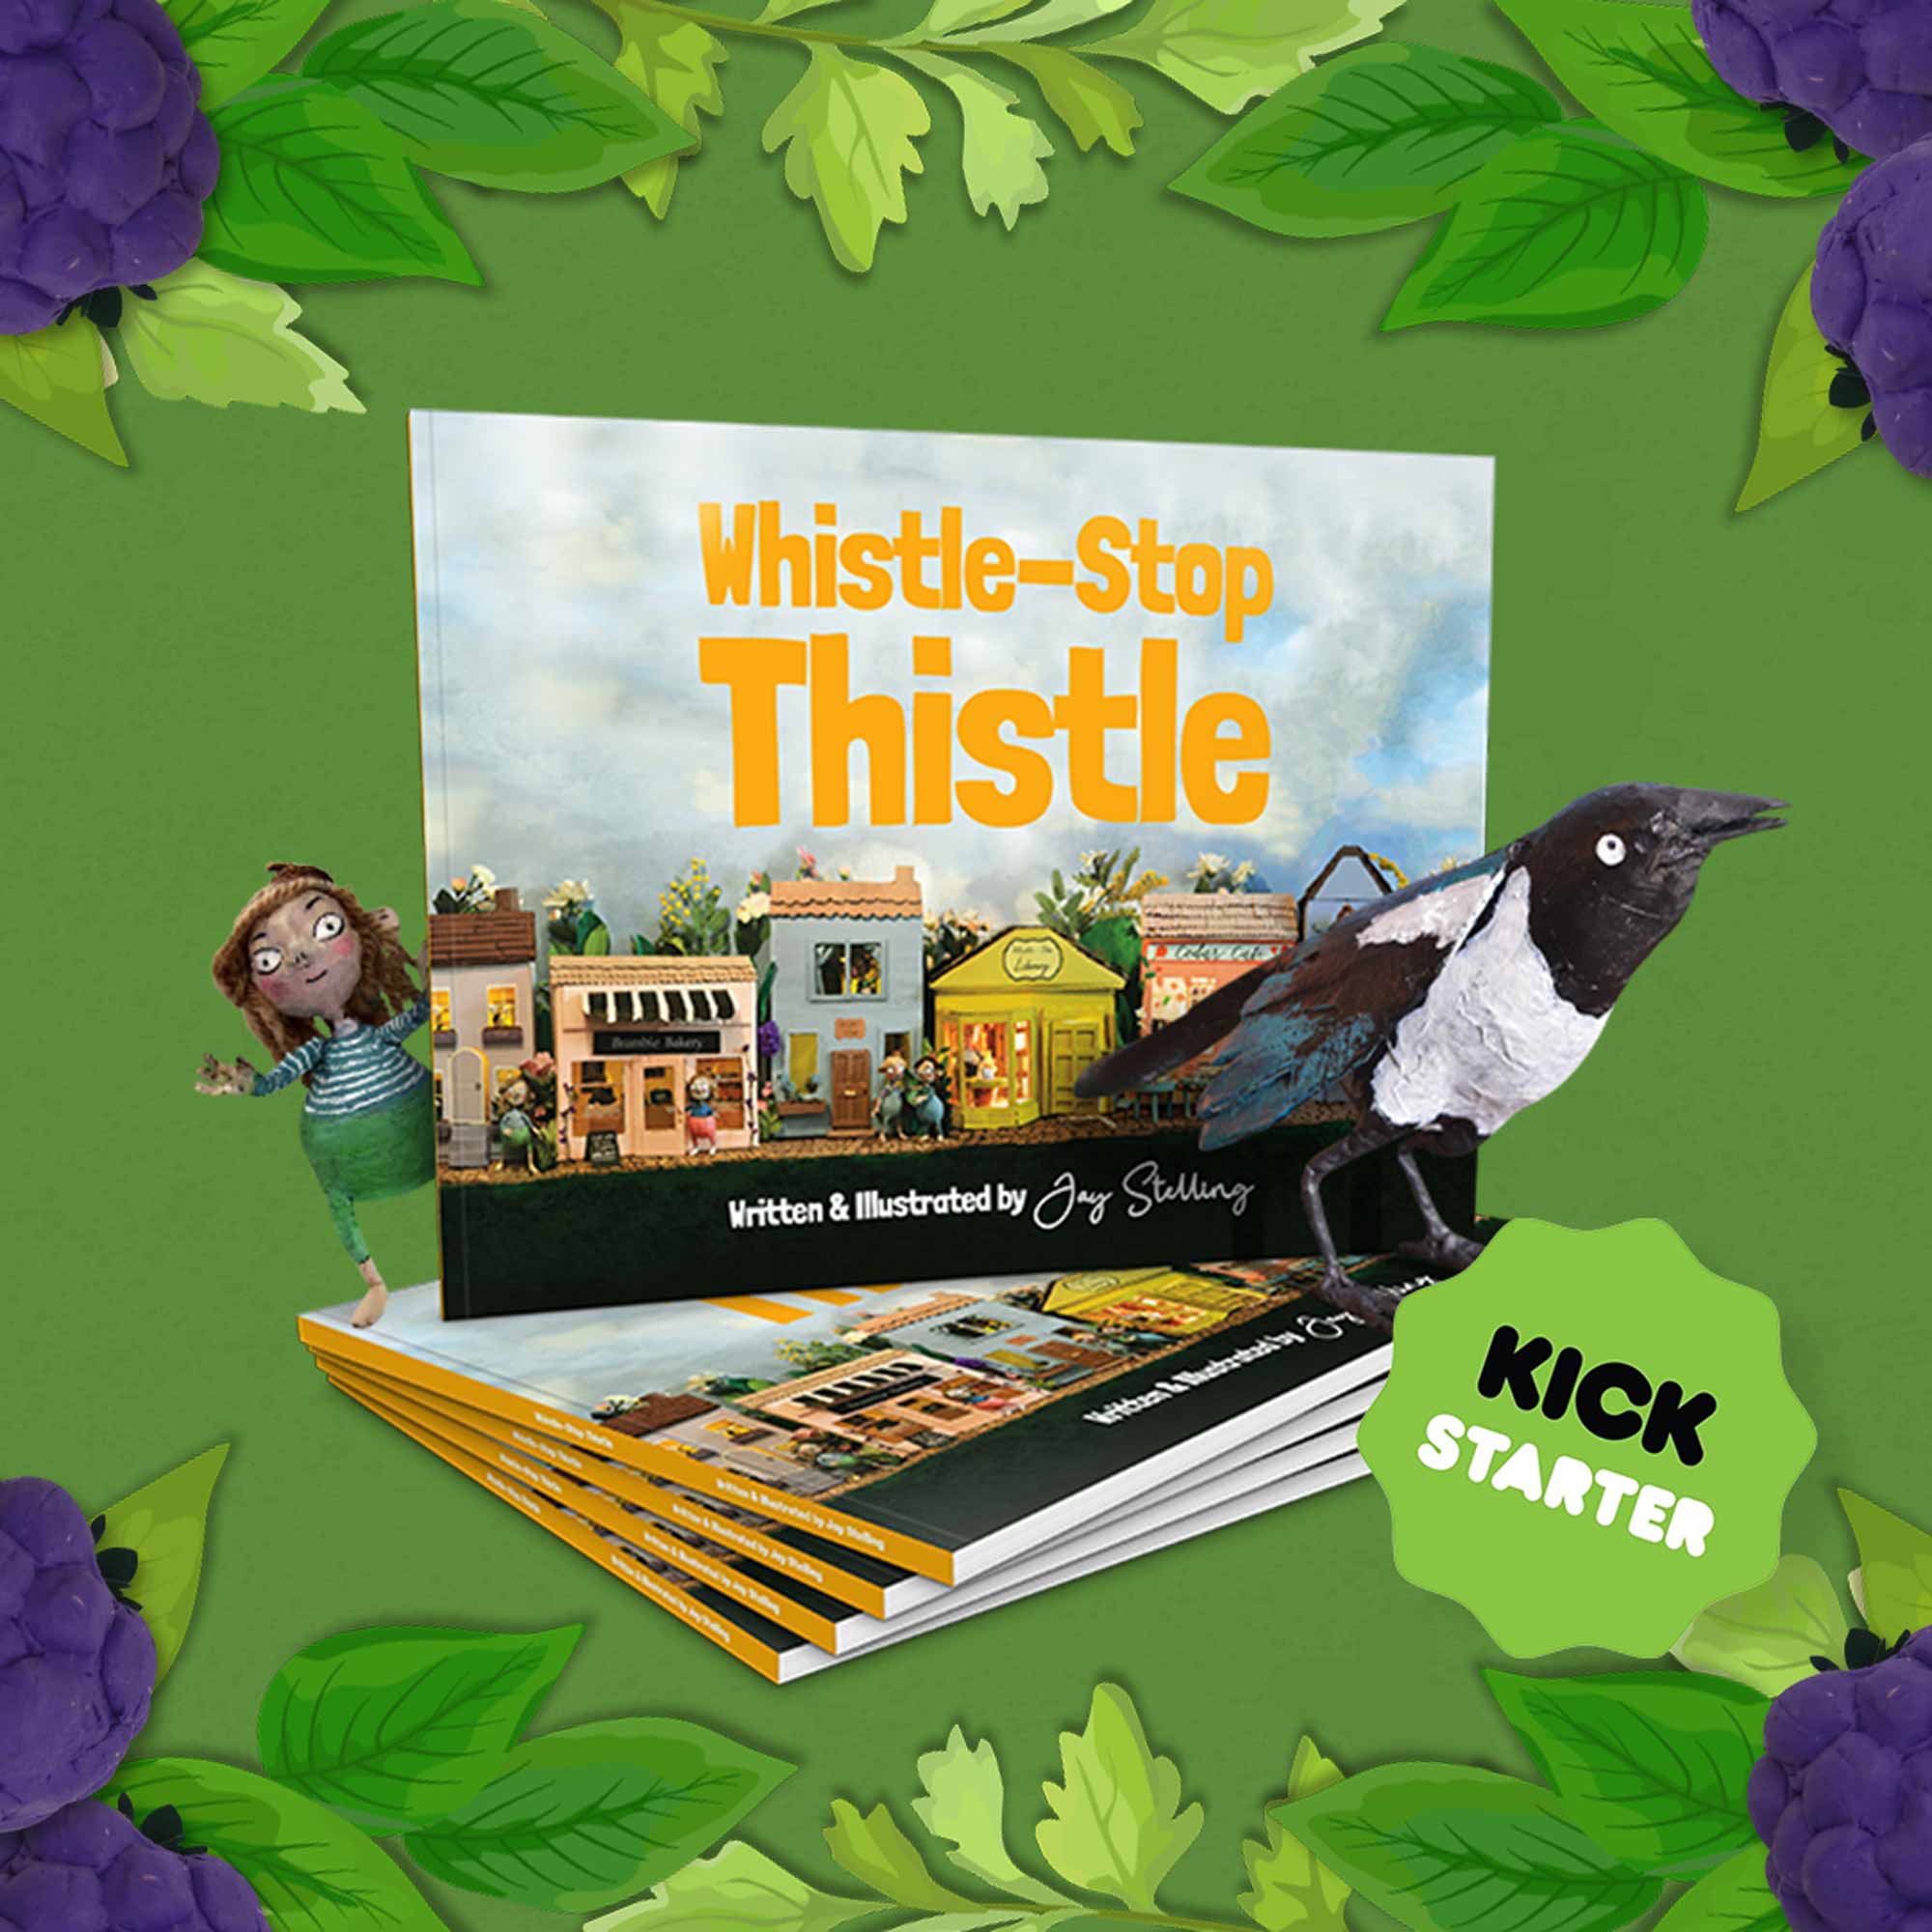 Whistle-Stop Thistle